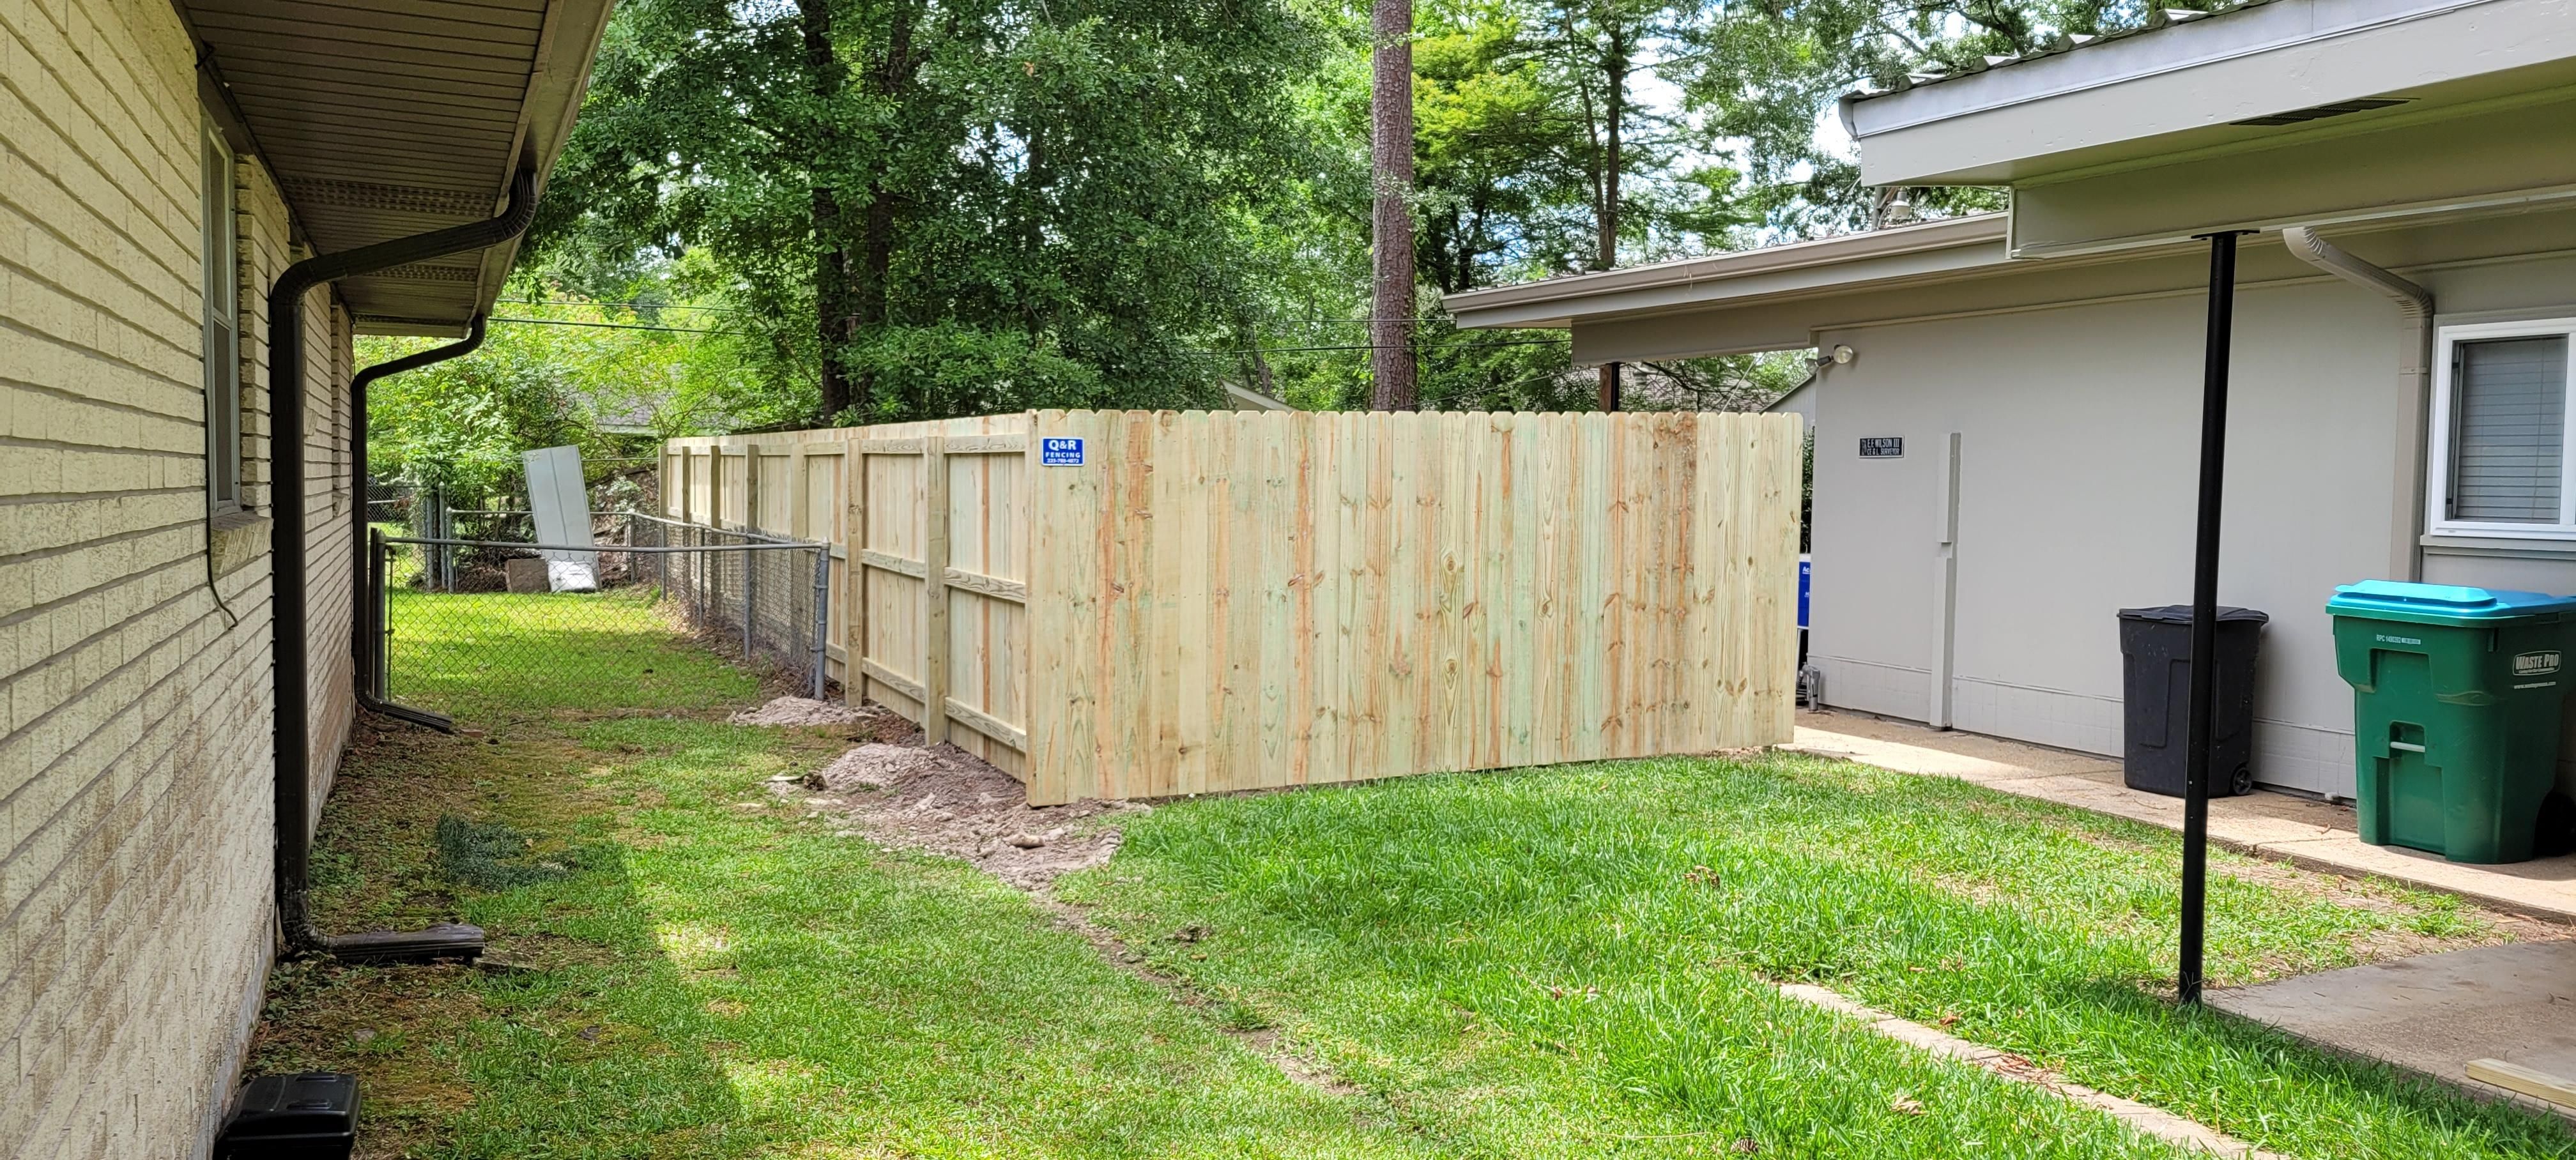 All Photos for Quick and Ready Fencing in Denham Springs, LA